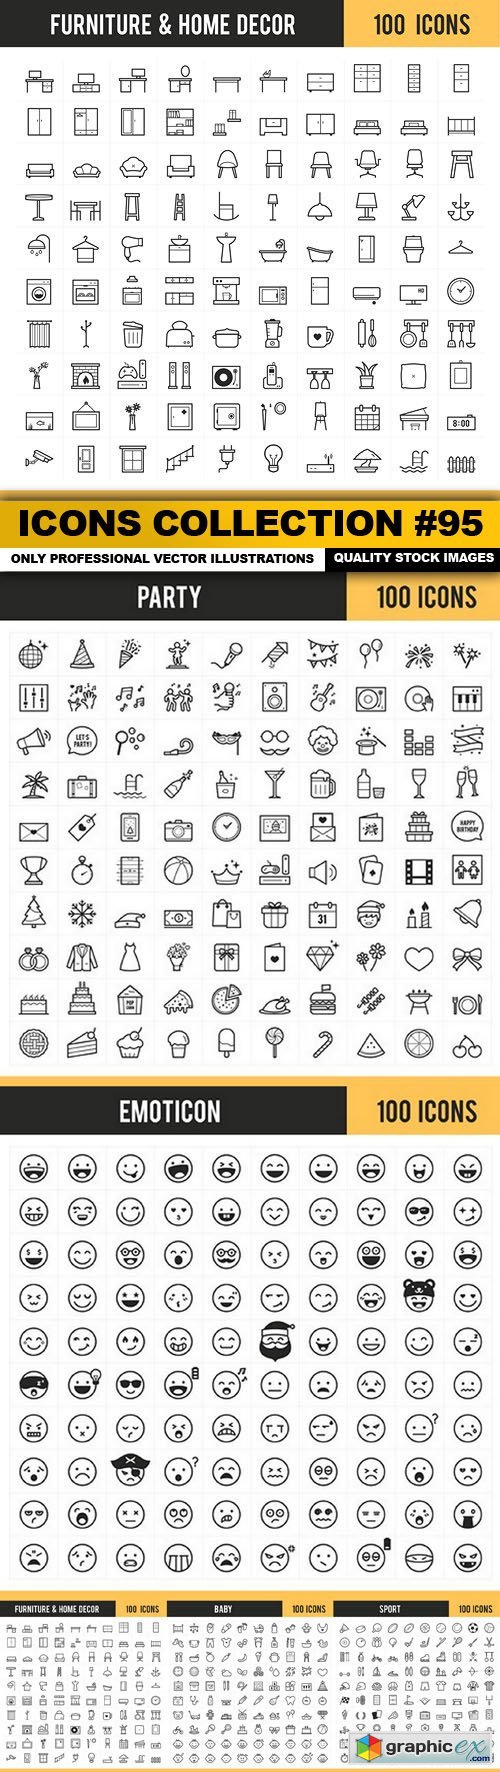 Icons Collection #95 - 5 Vector